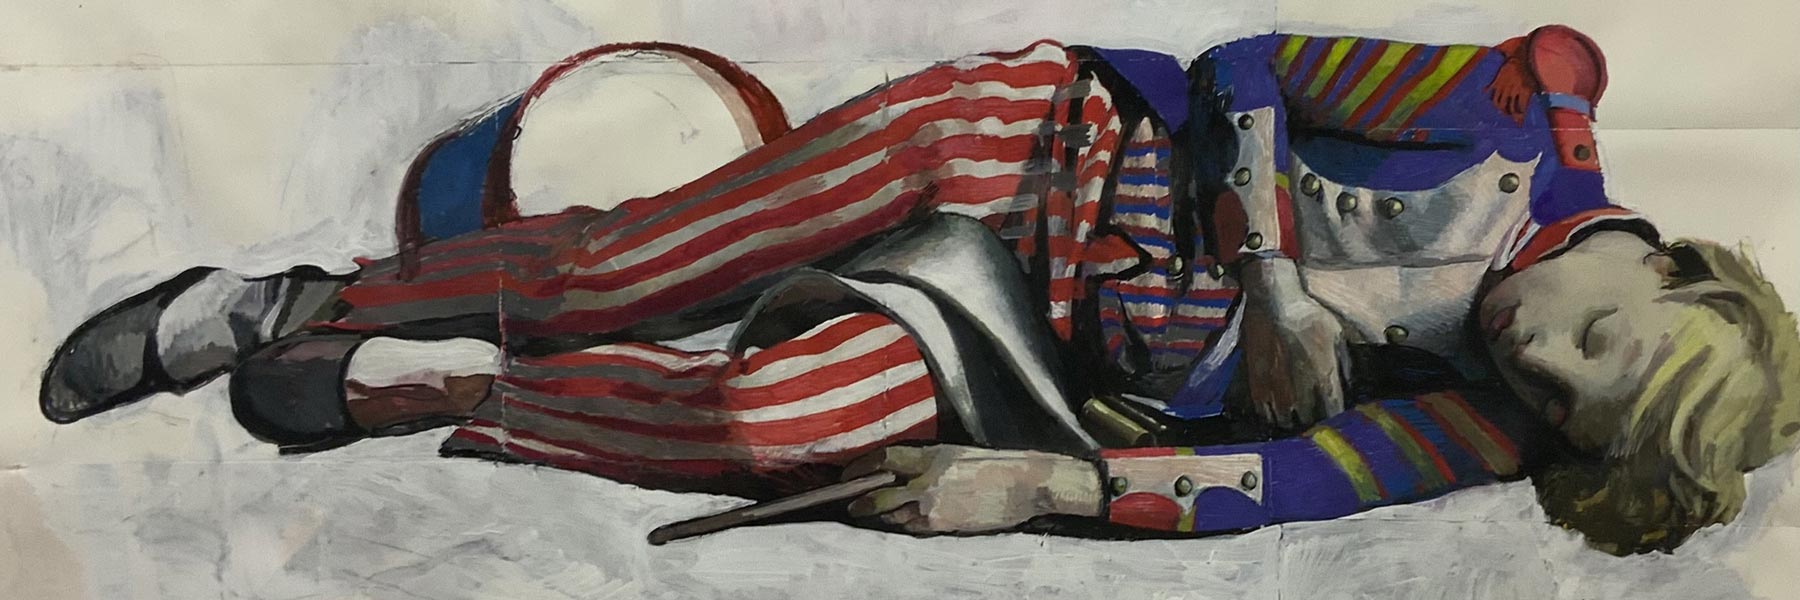 A painting of a young boy wearing a period military uniform, lying on his side holding a drumstick. A small drum rests behind him.